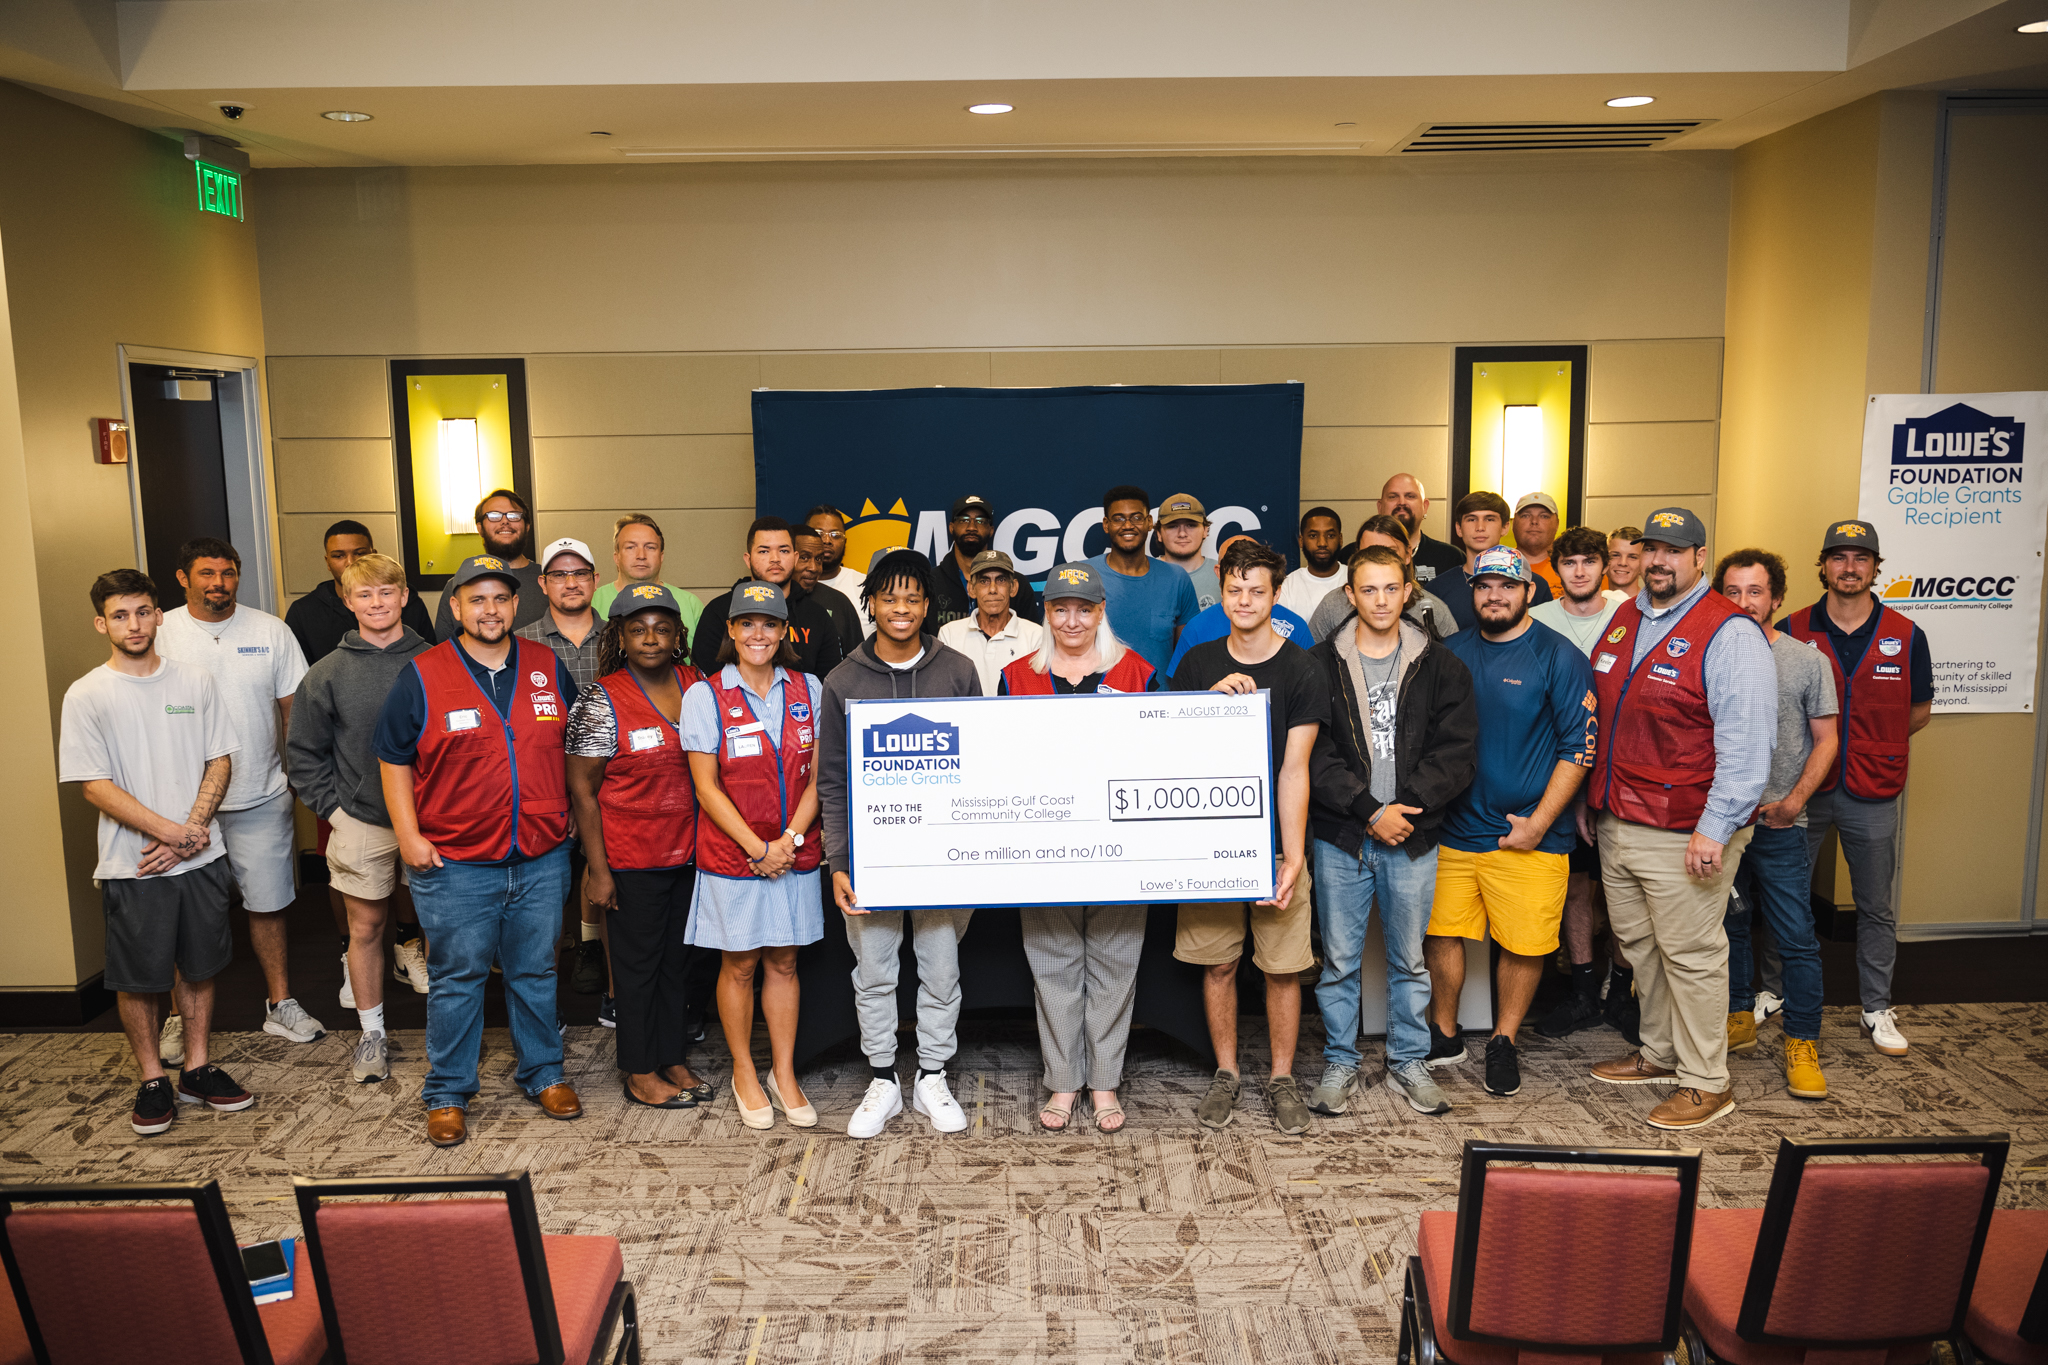 Lowe's Check Presentation with Lowe's employees, MGCCC employees and students